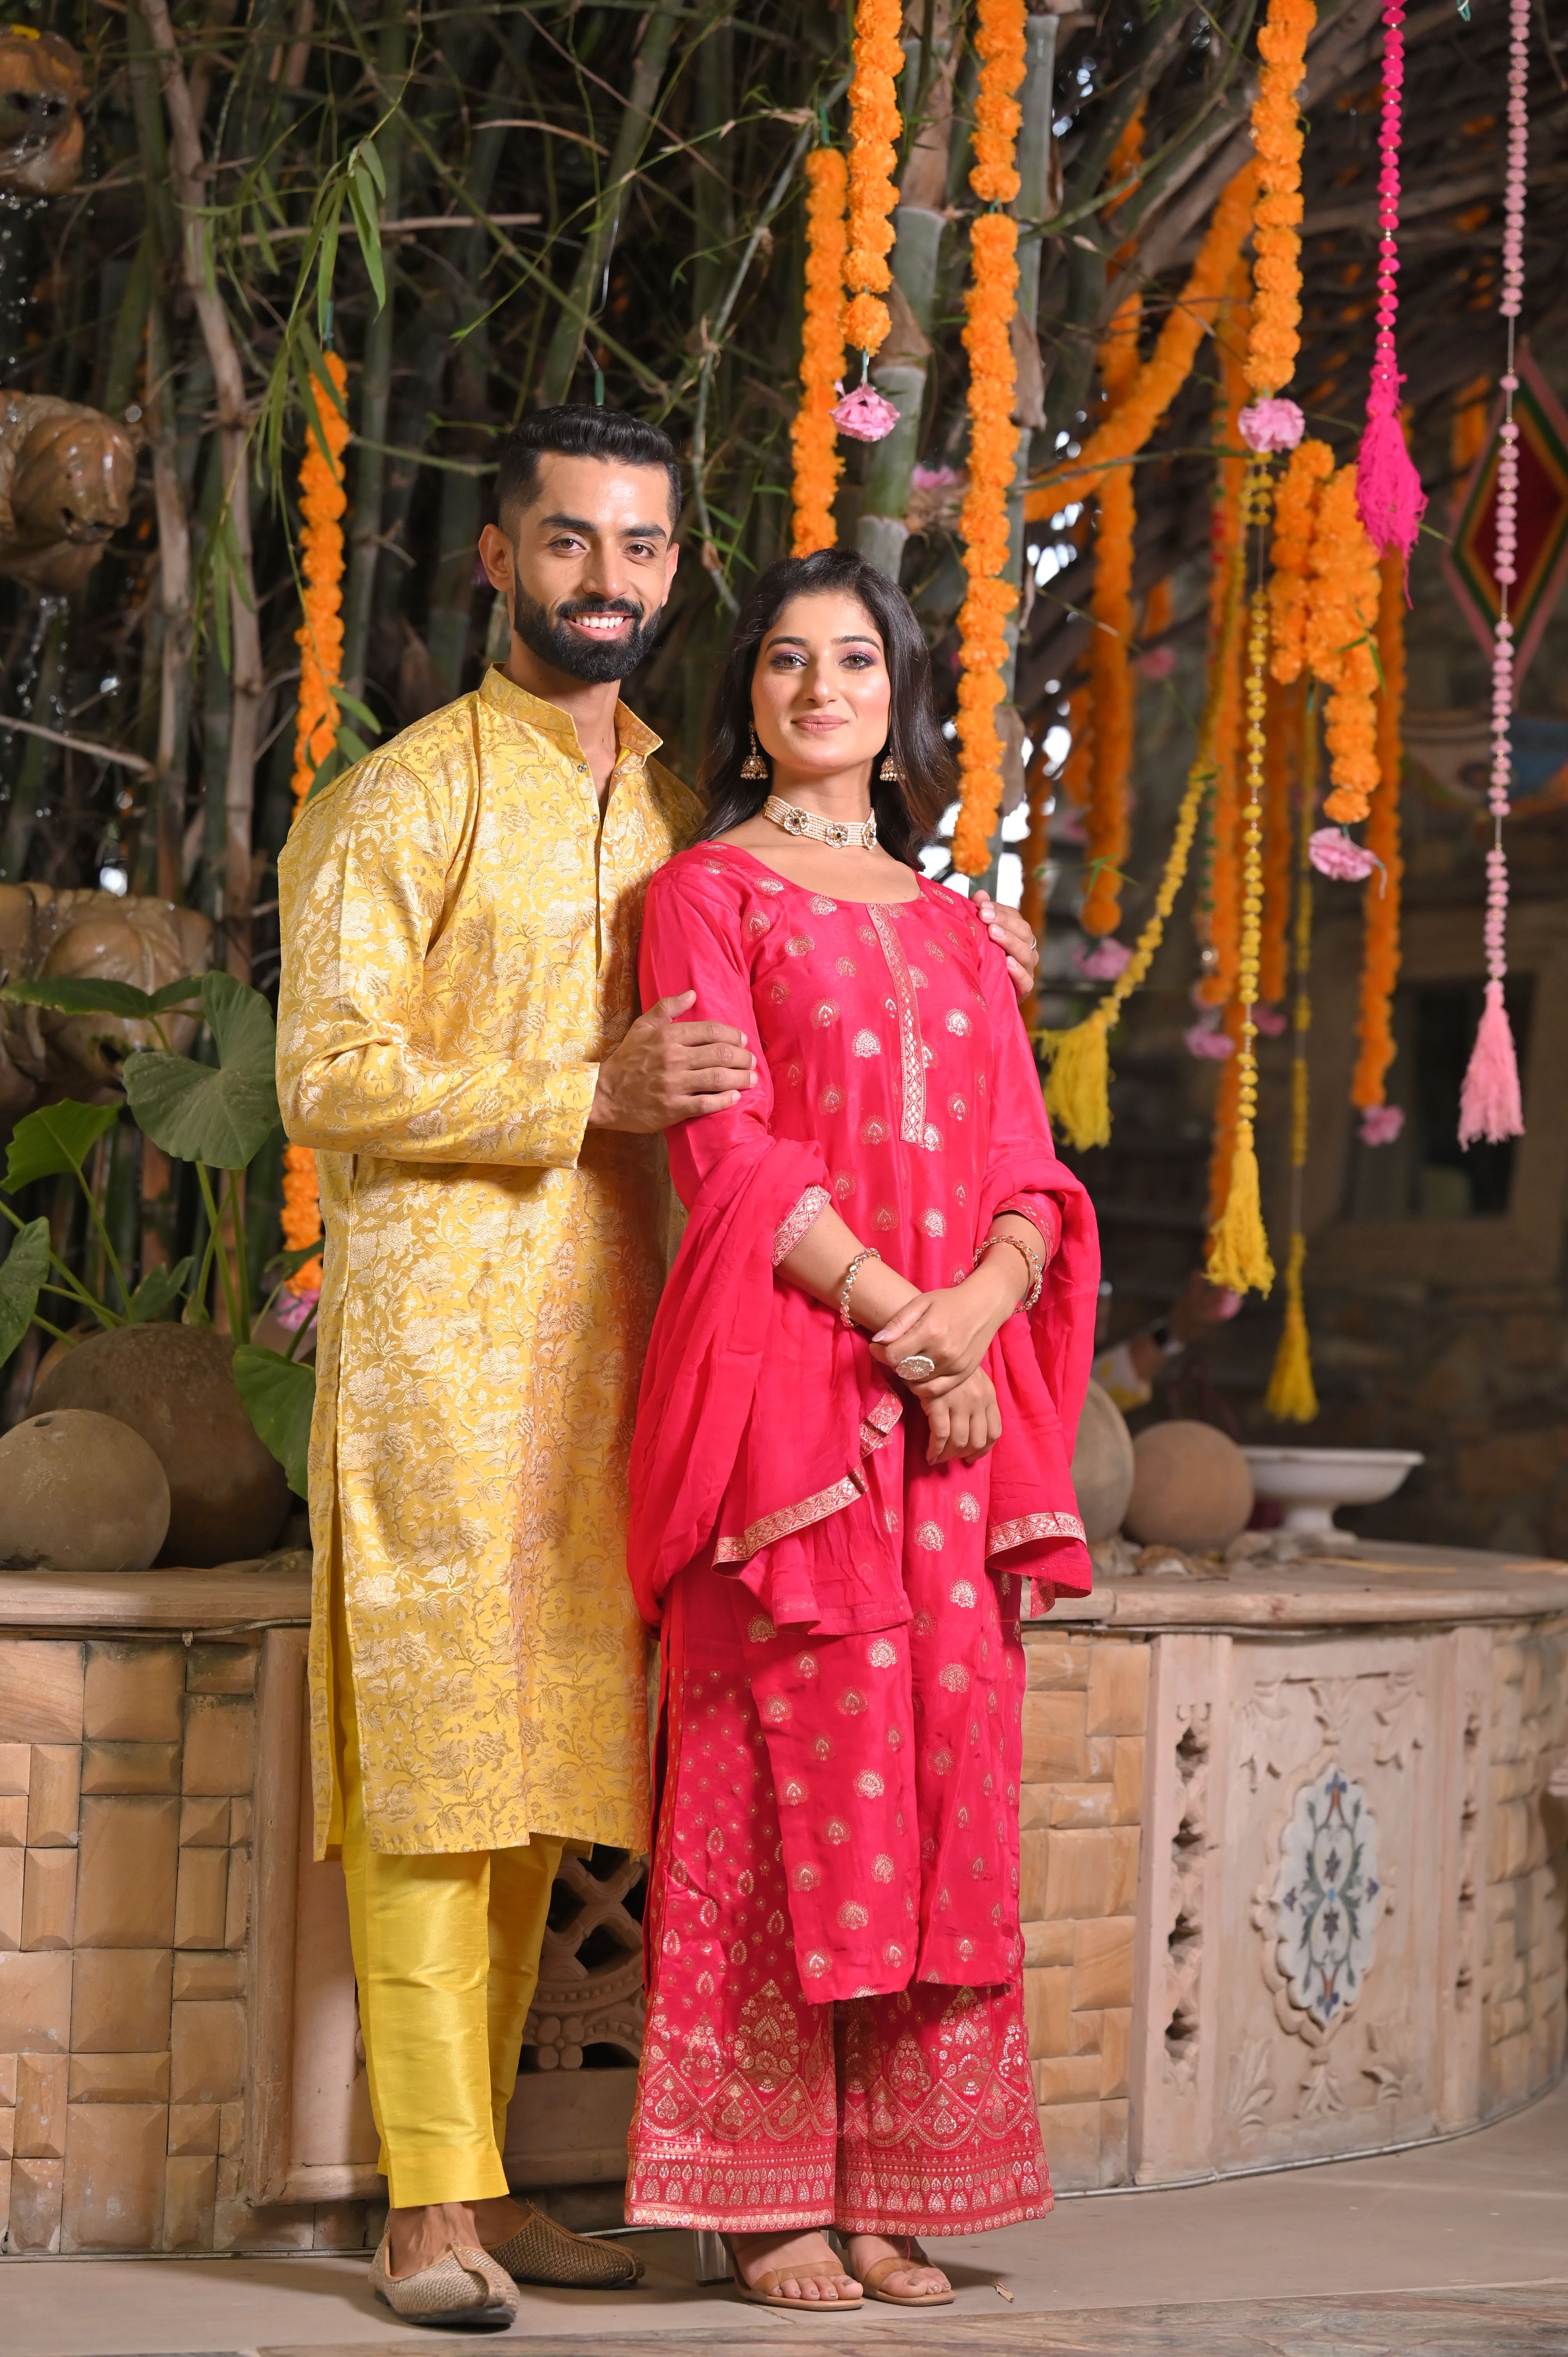 Buy Couple Matching Outfits/ Couple Wedding Dress/couple Africa Matching  Outfit/ Prom Dress for Couples/ Africa Wedding Suit Online in India - Etsy